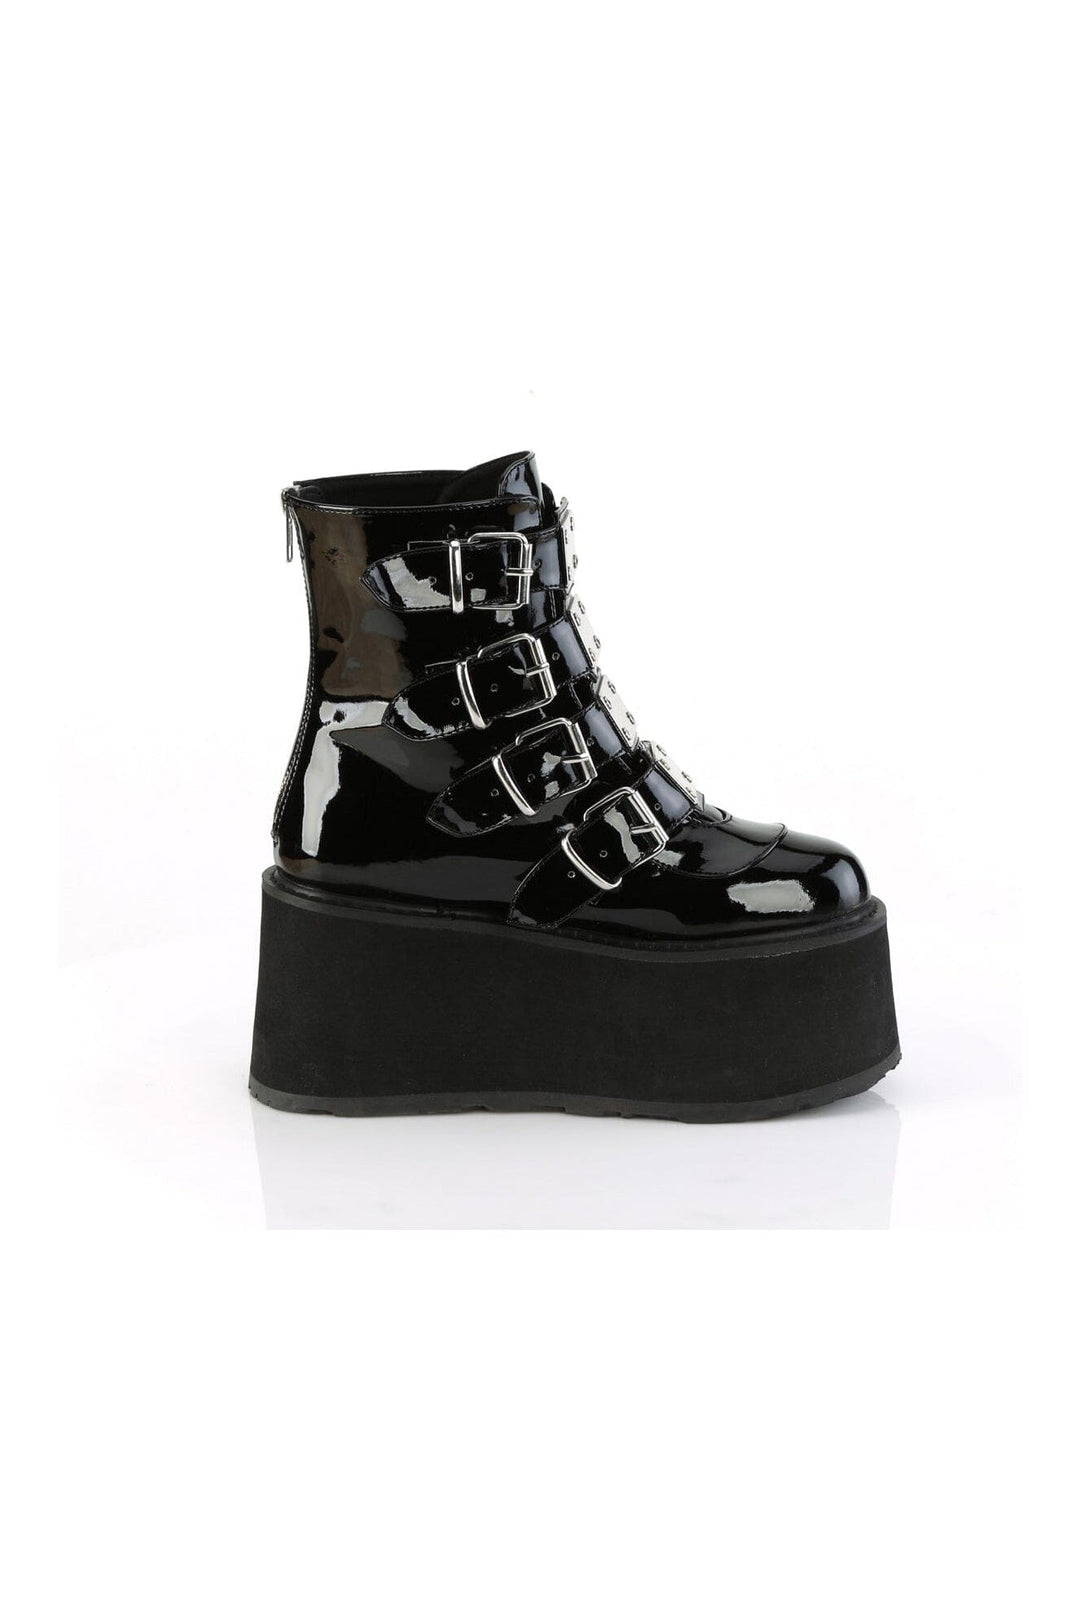 DAMNED-105 Black Patent Ankle Boot-Ankle Boots-Demonia-SEXYSHOES.COM